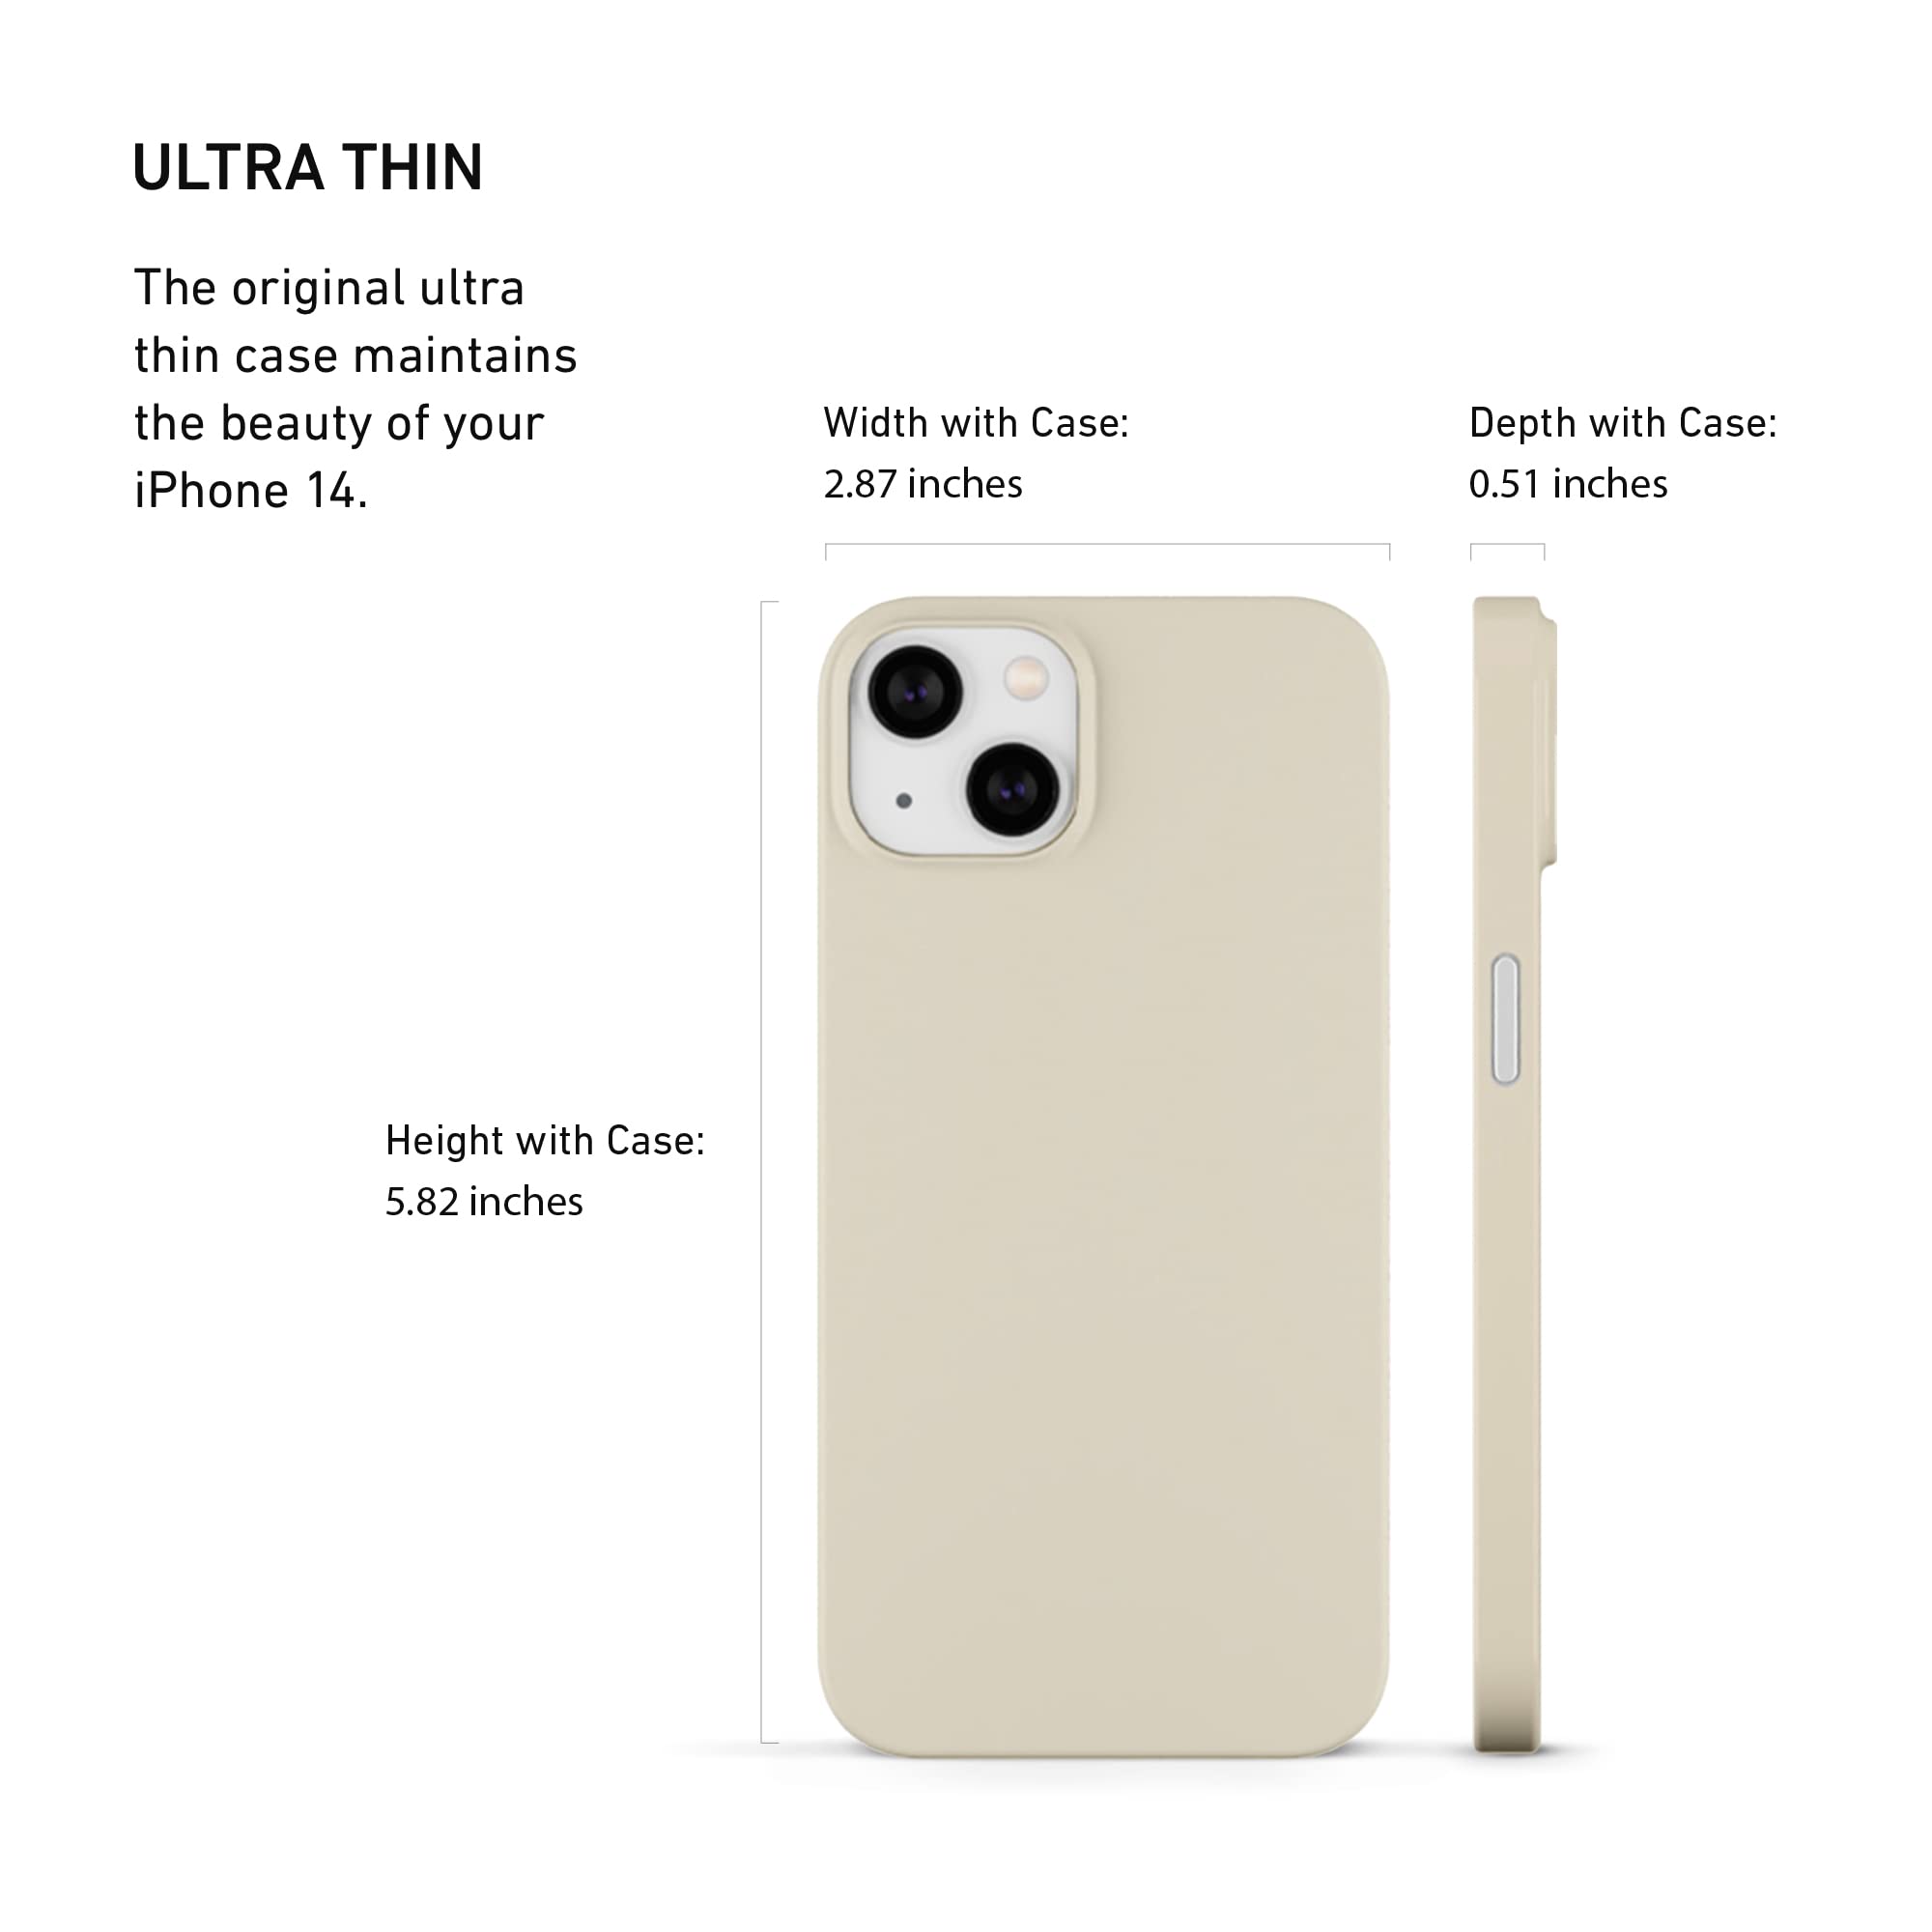 PEEL Ultra Thin iPhone 14 Case, Bone - Minimalist Design | Branding Free | Protects and Showcases Your Apple iPhone 14